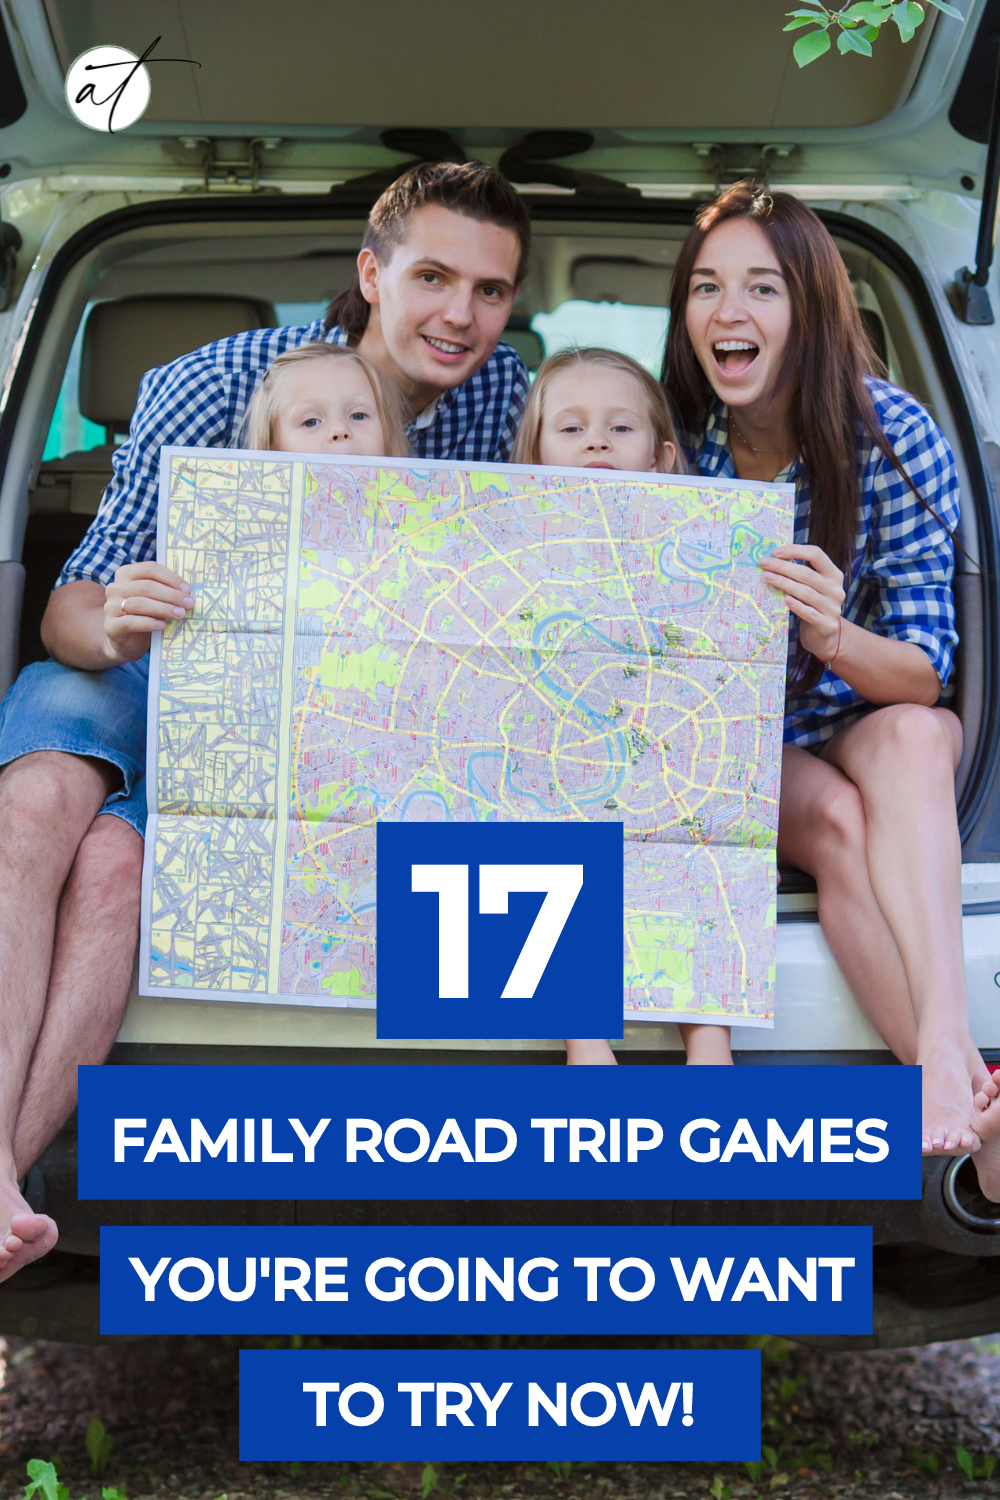 Family in car enjoying family road trip games. They seem cozy and happy together. 